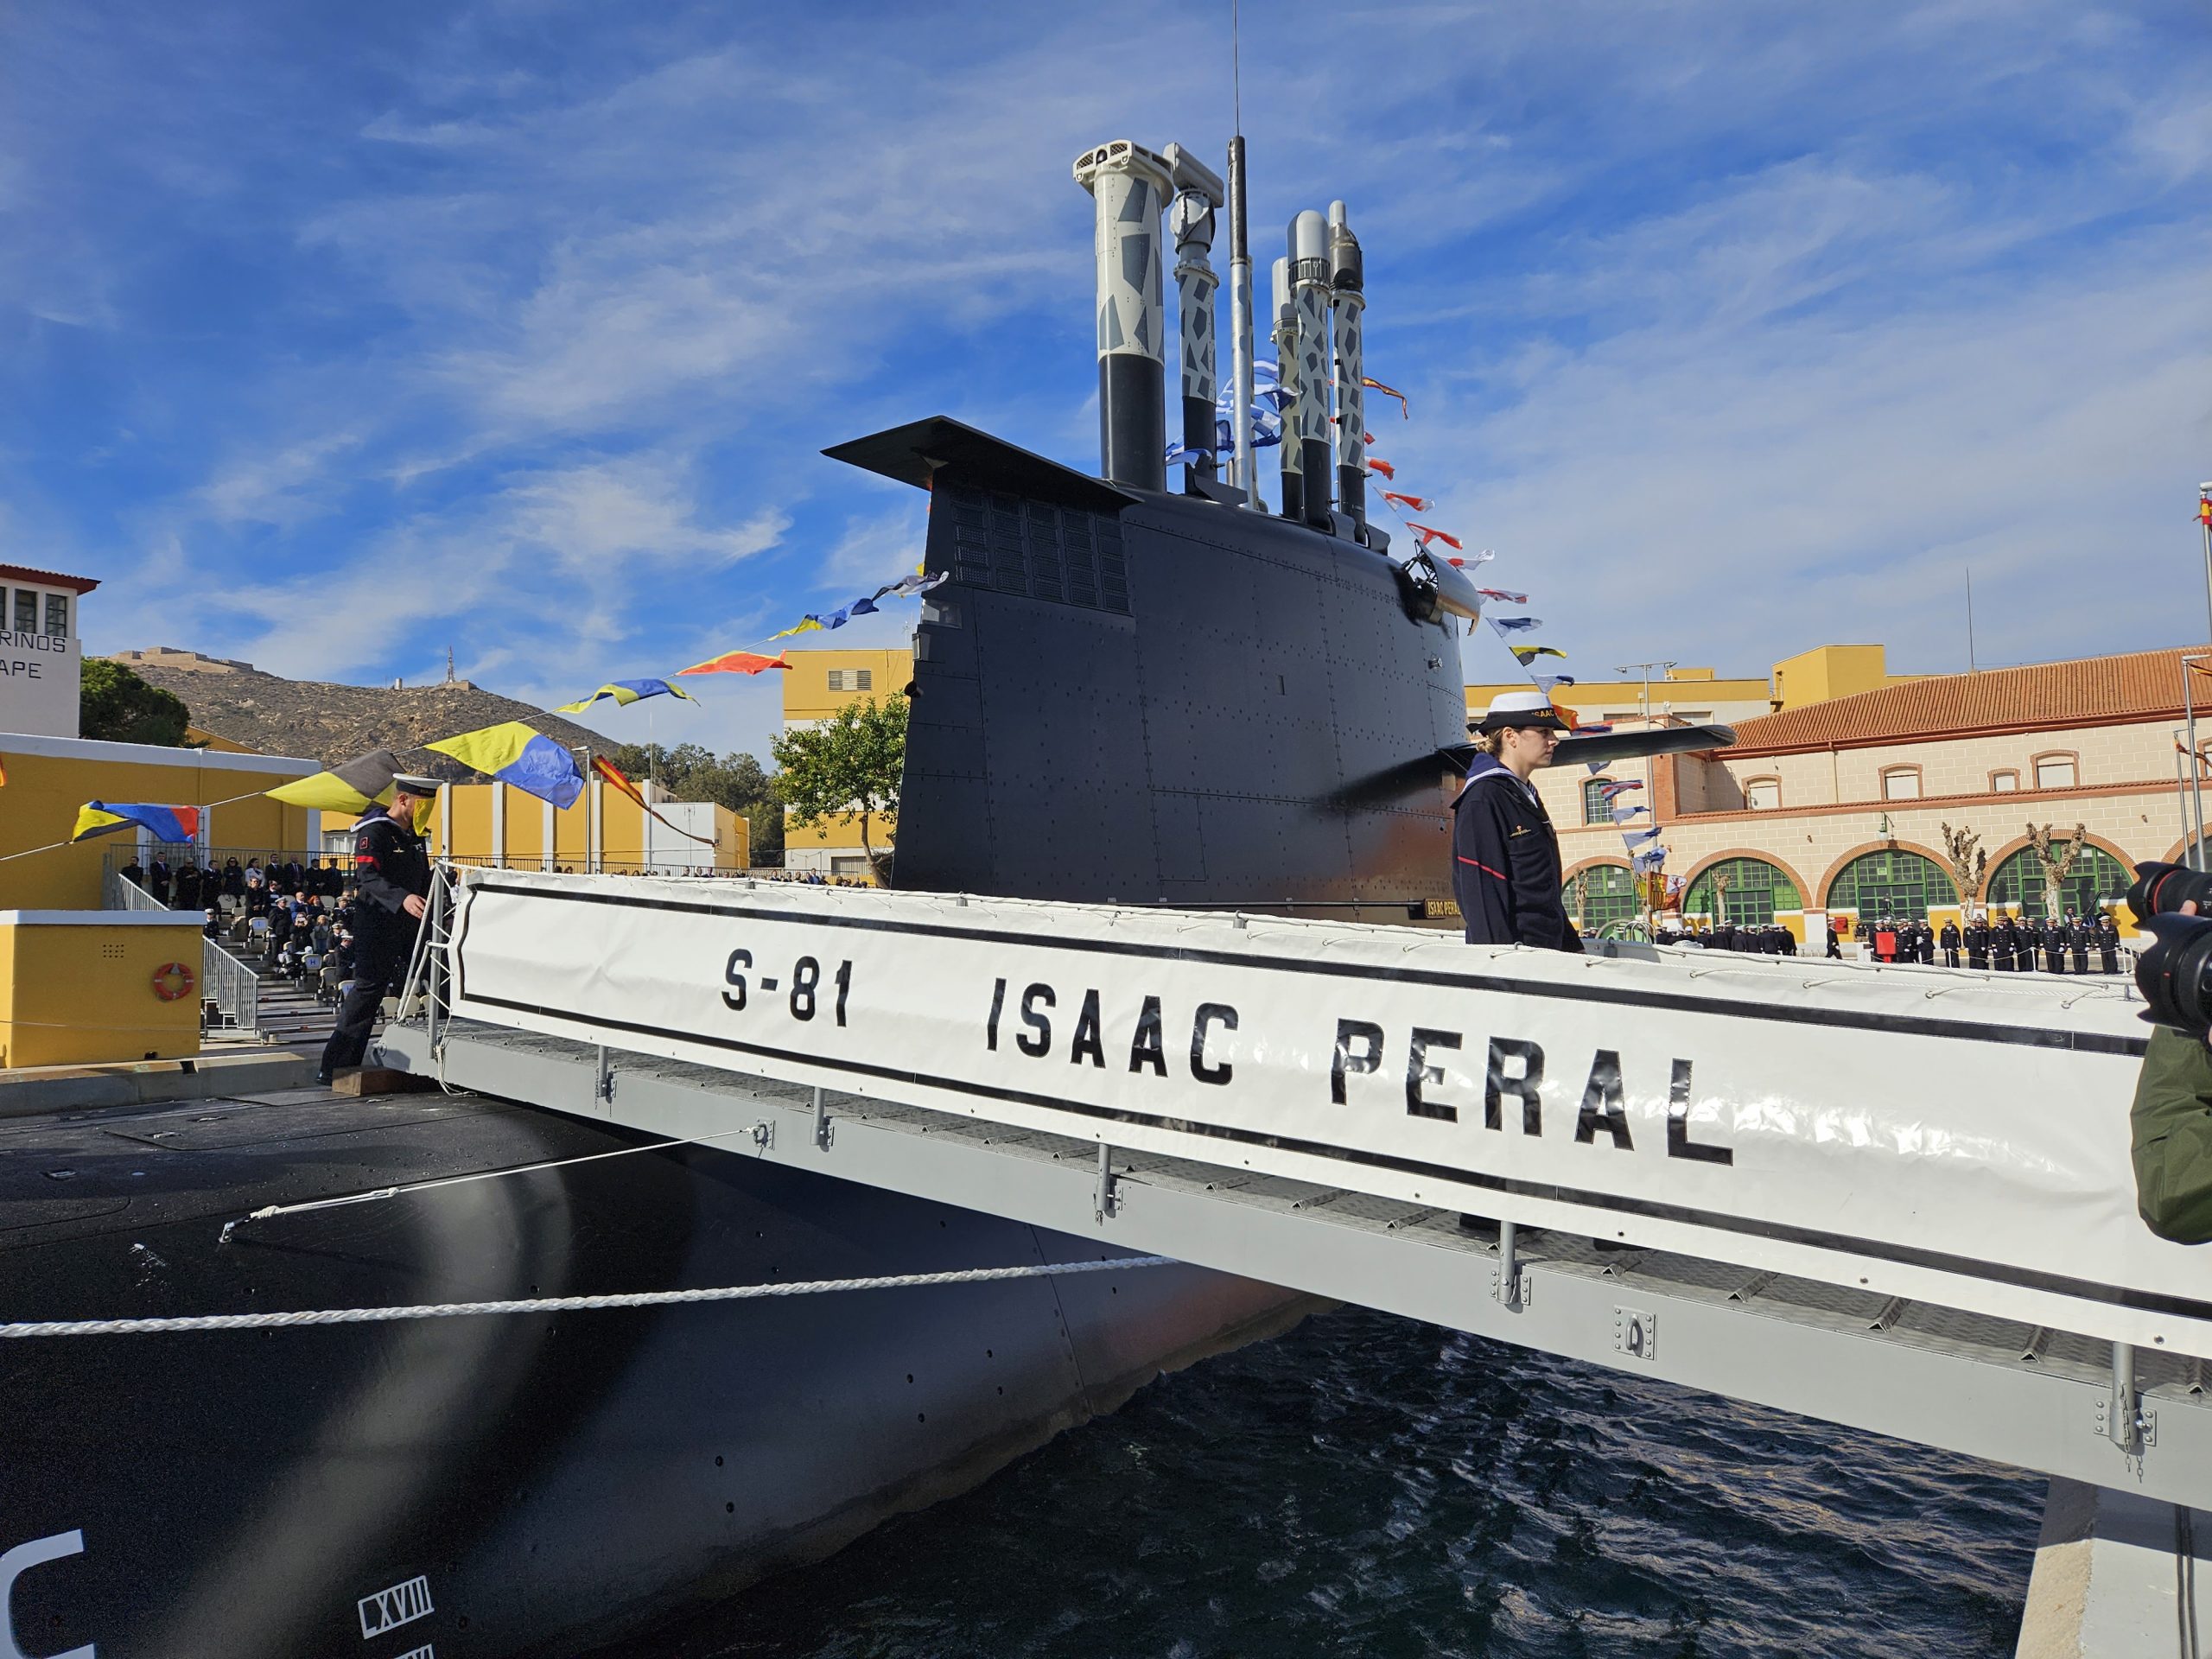 S-81 'Isaac Peral' submarine commissioned by the Spanish Navy